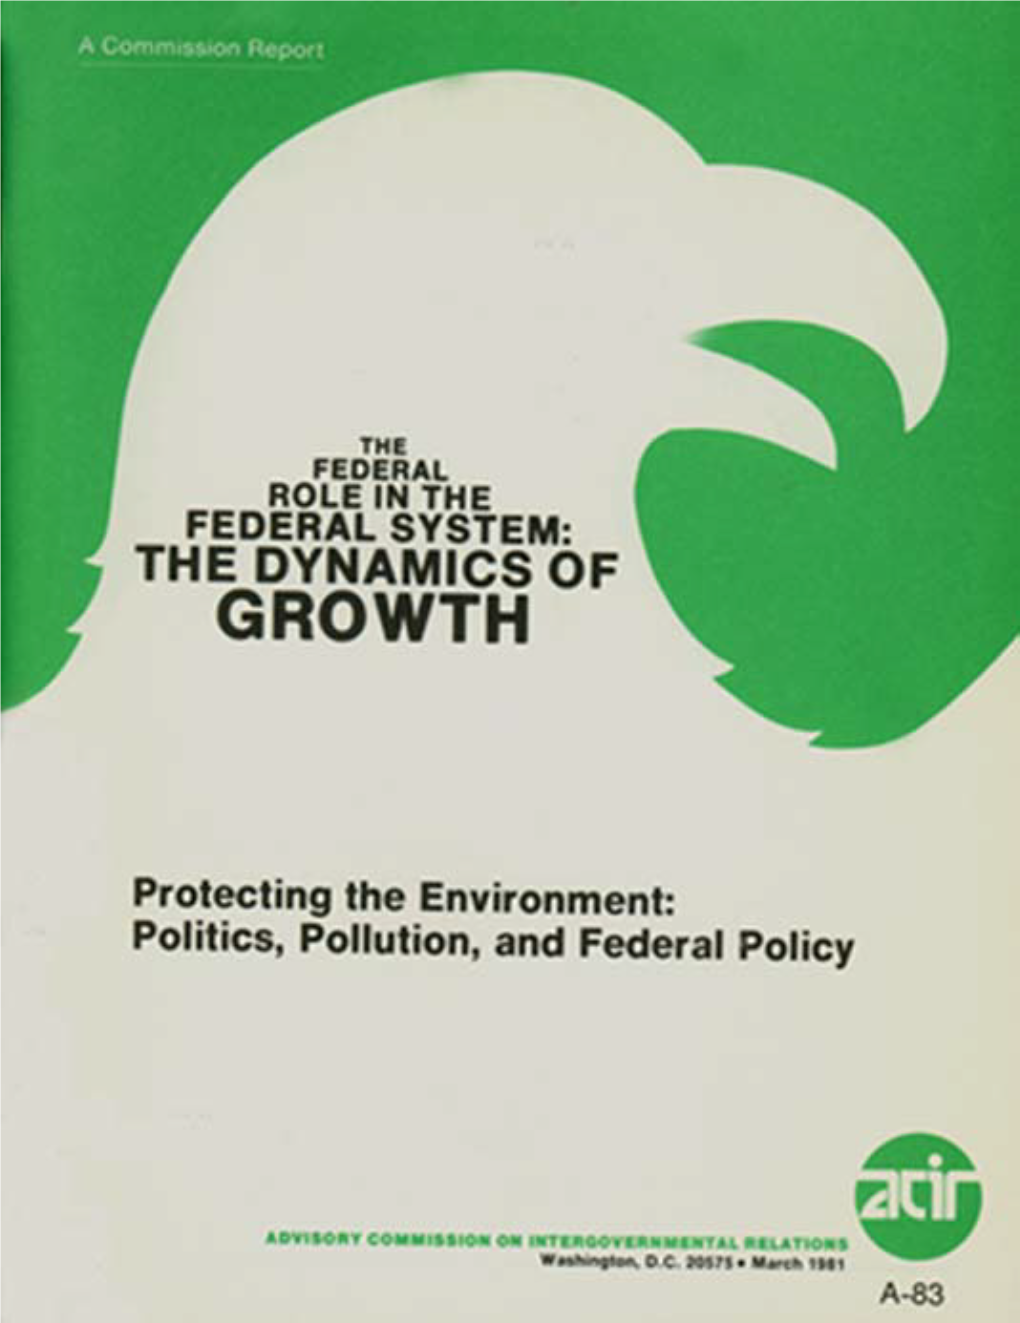 Protecting the Environment, Politics, Pollution, and Federal Policy, Commission Report